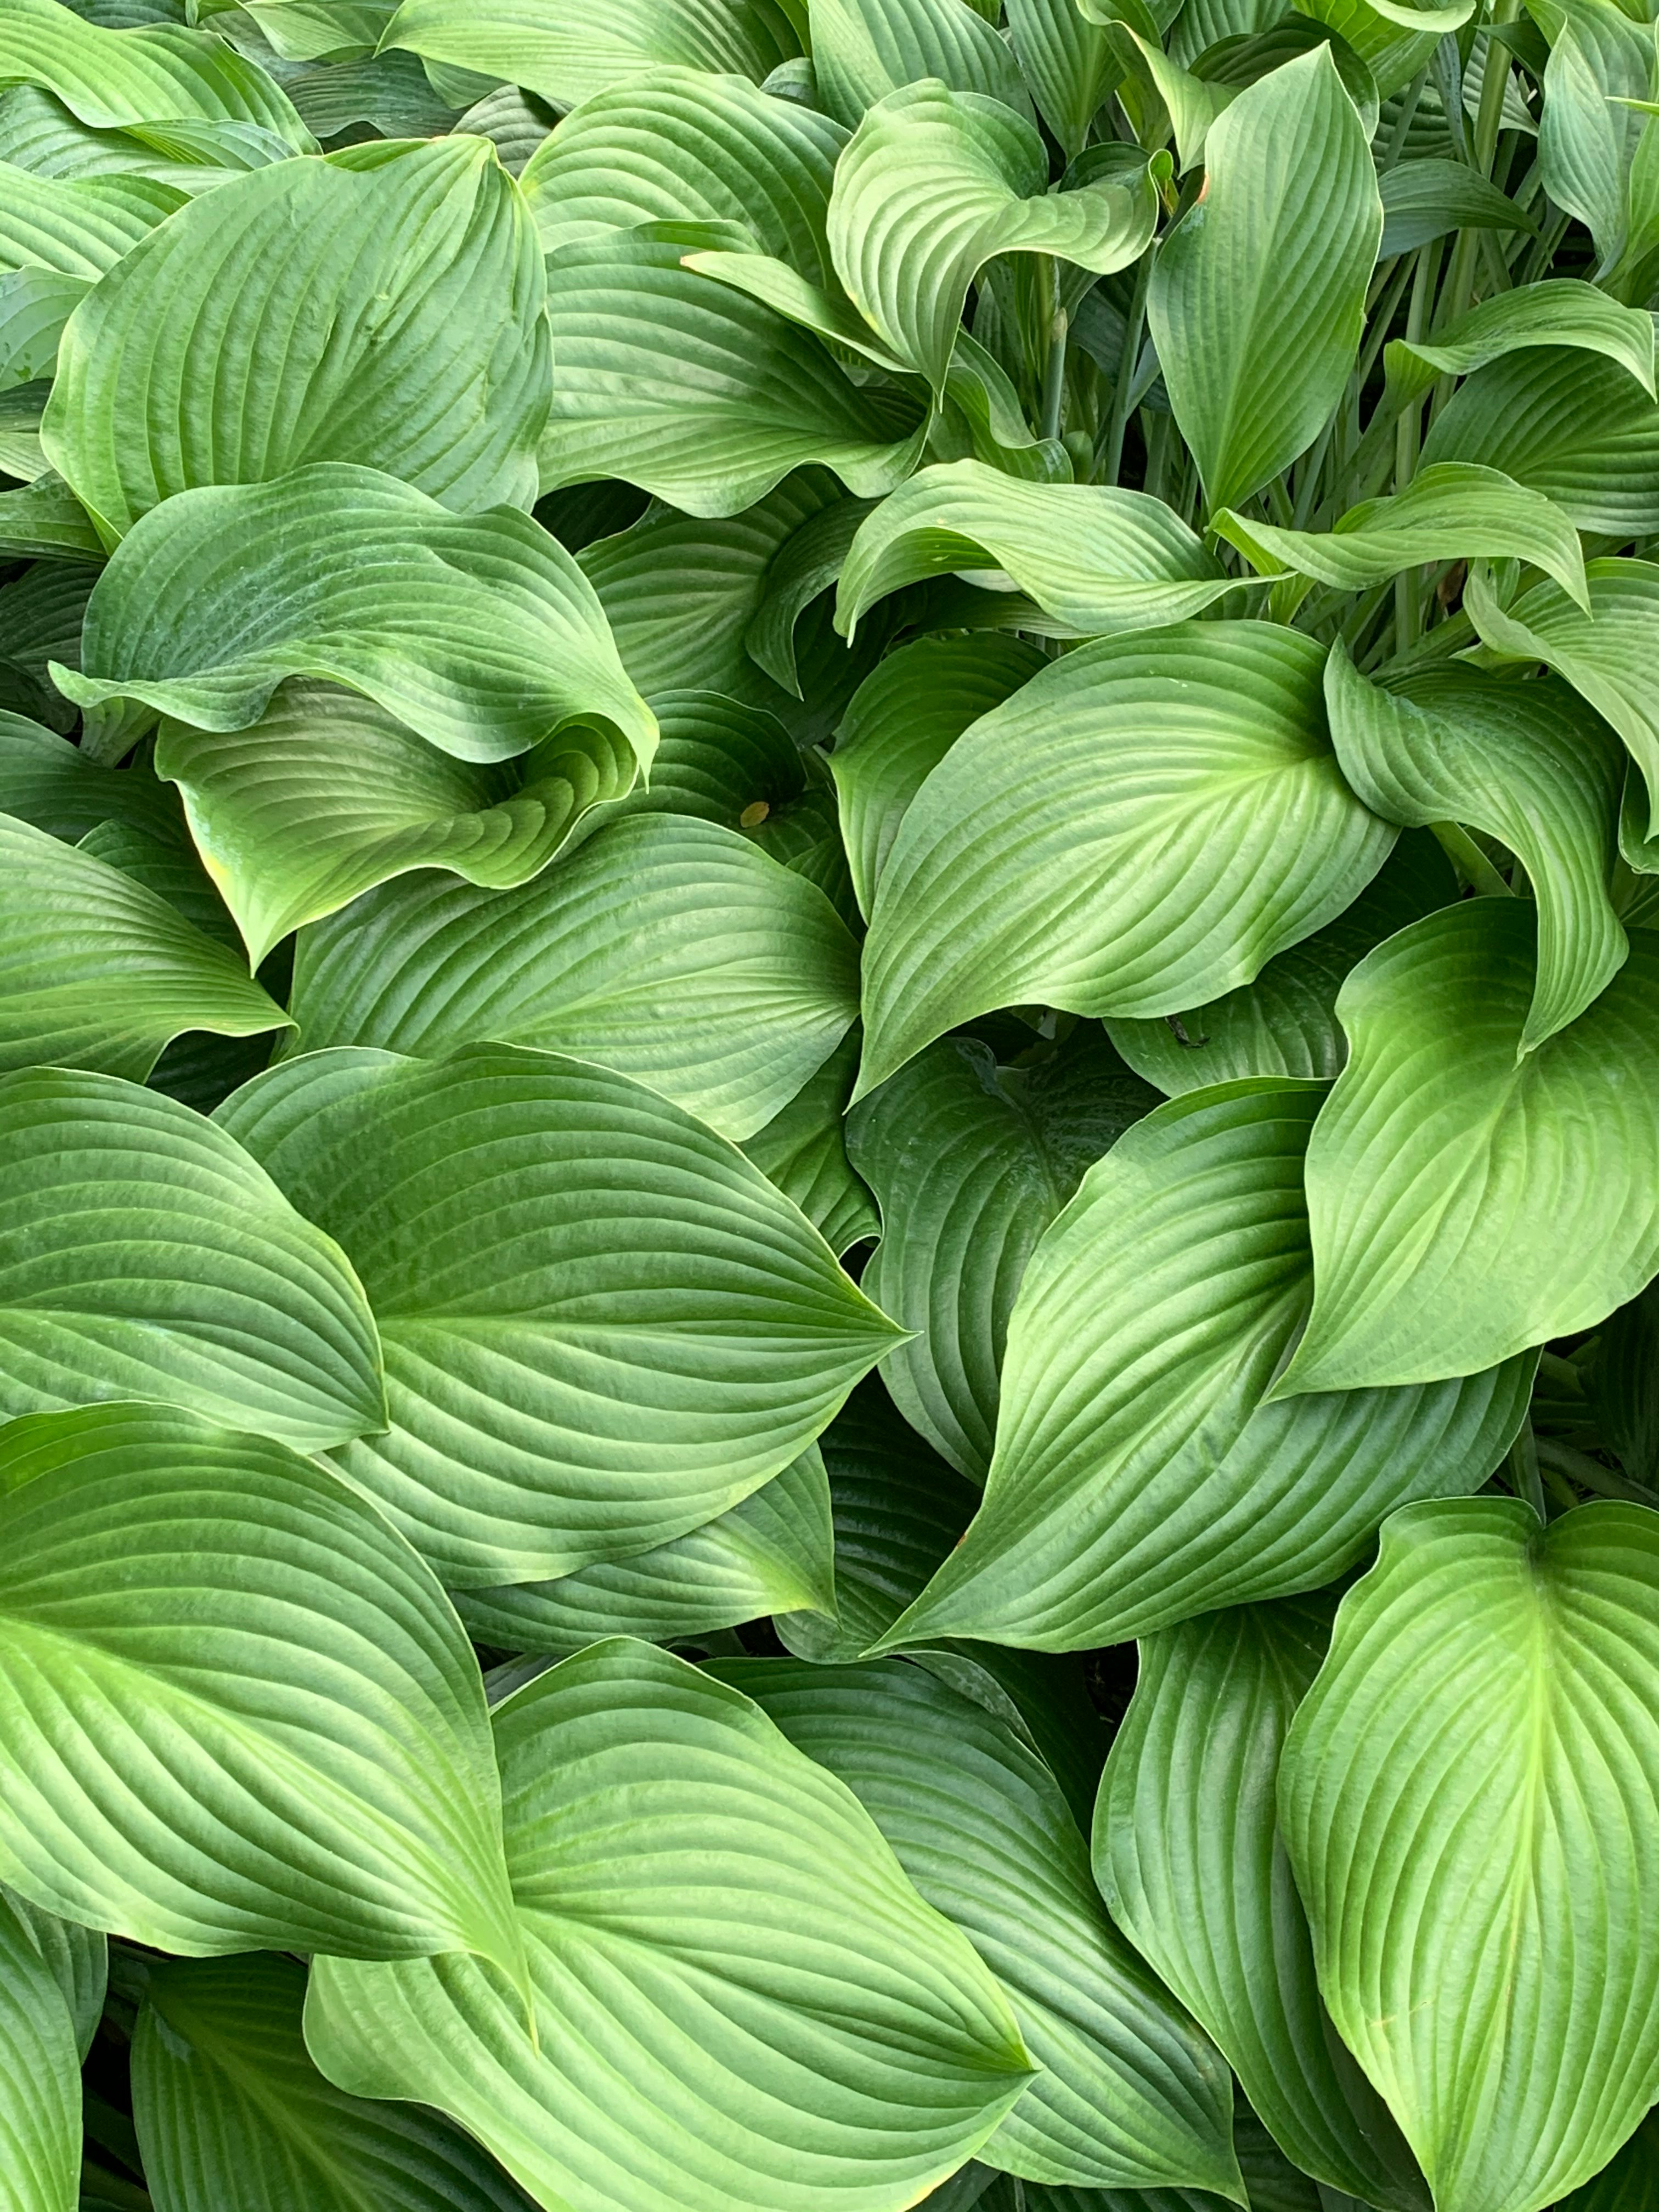 The lush growth of mature hosta plants in a shady spot near a door is so welcoming in summer...